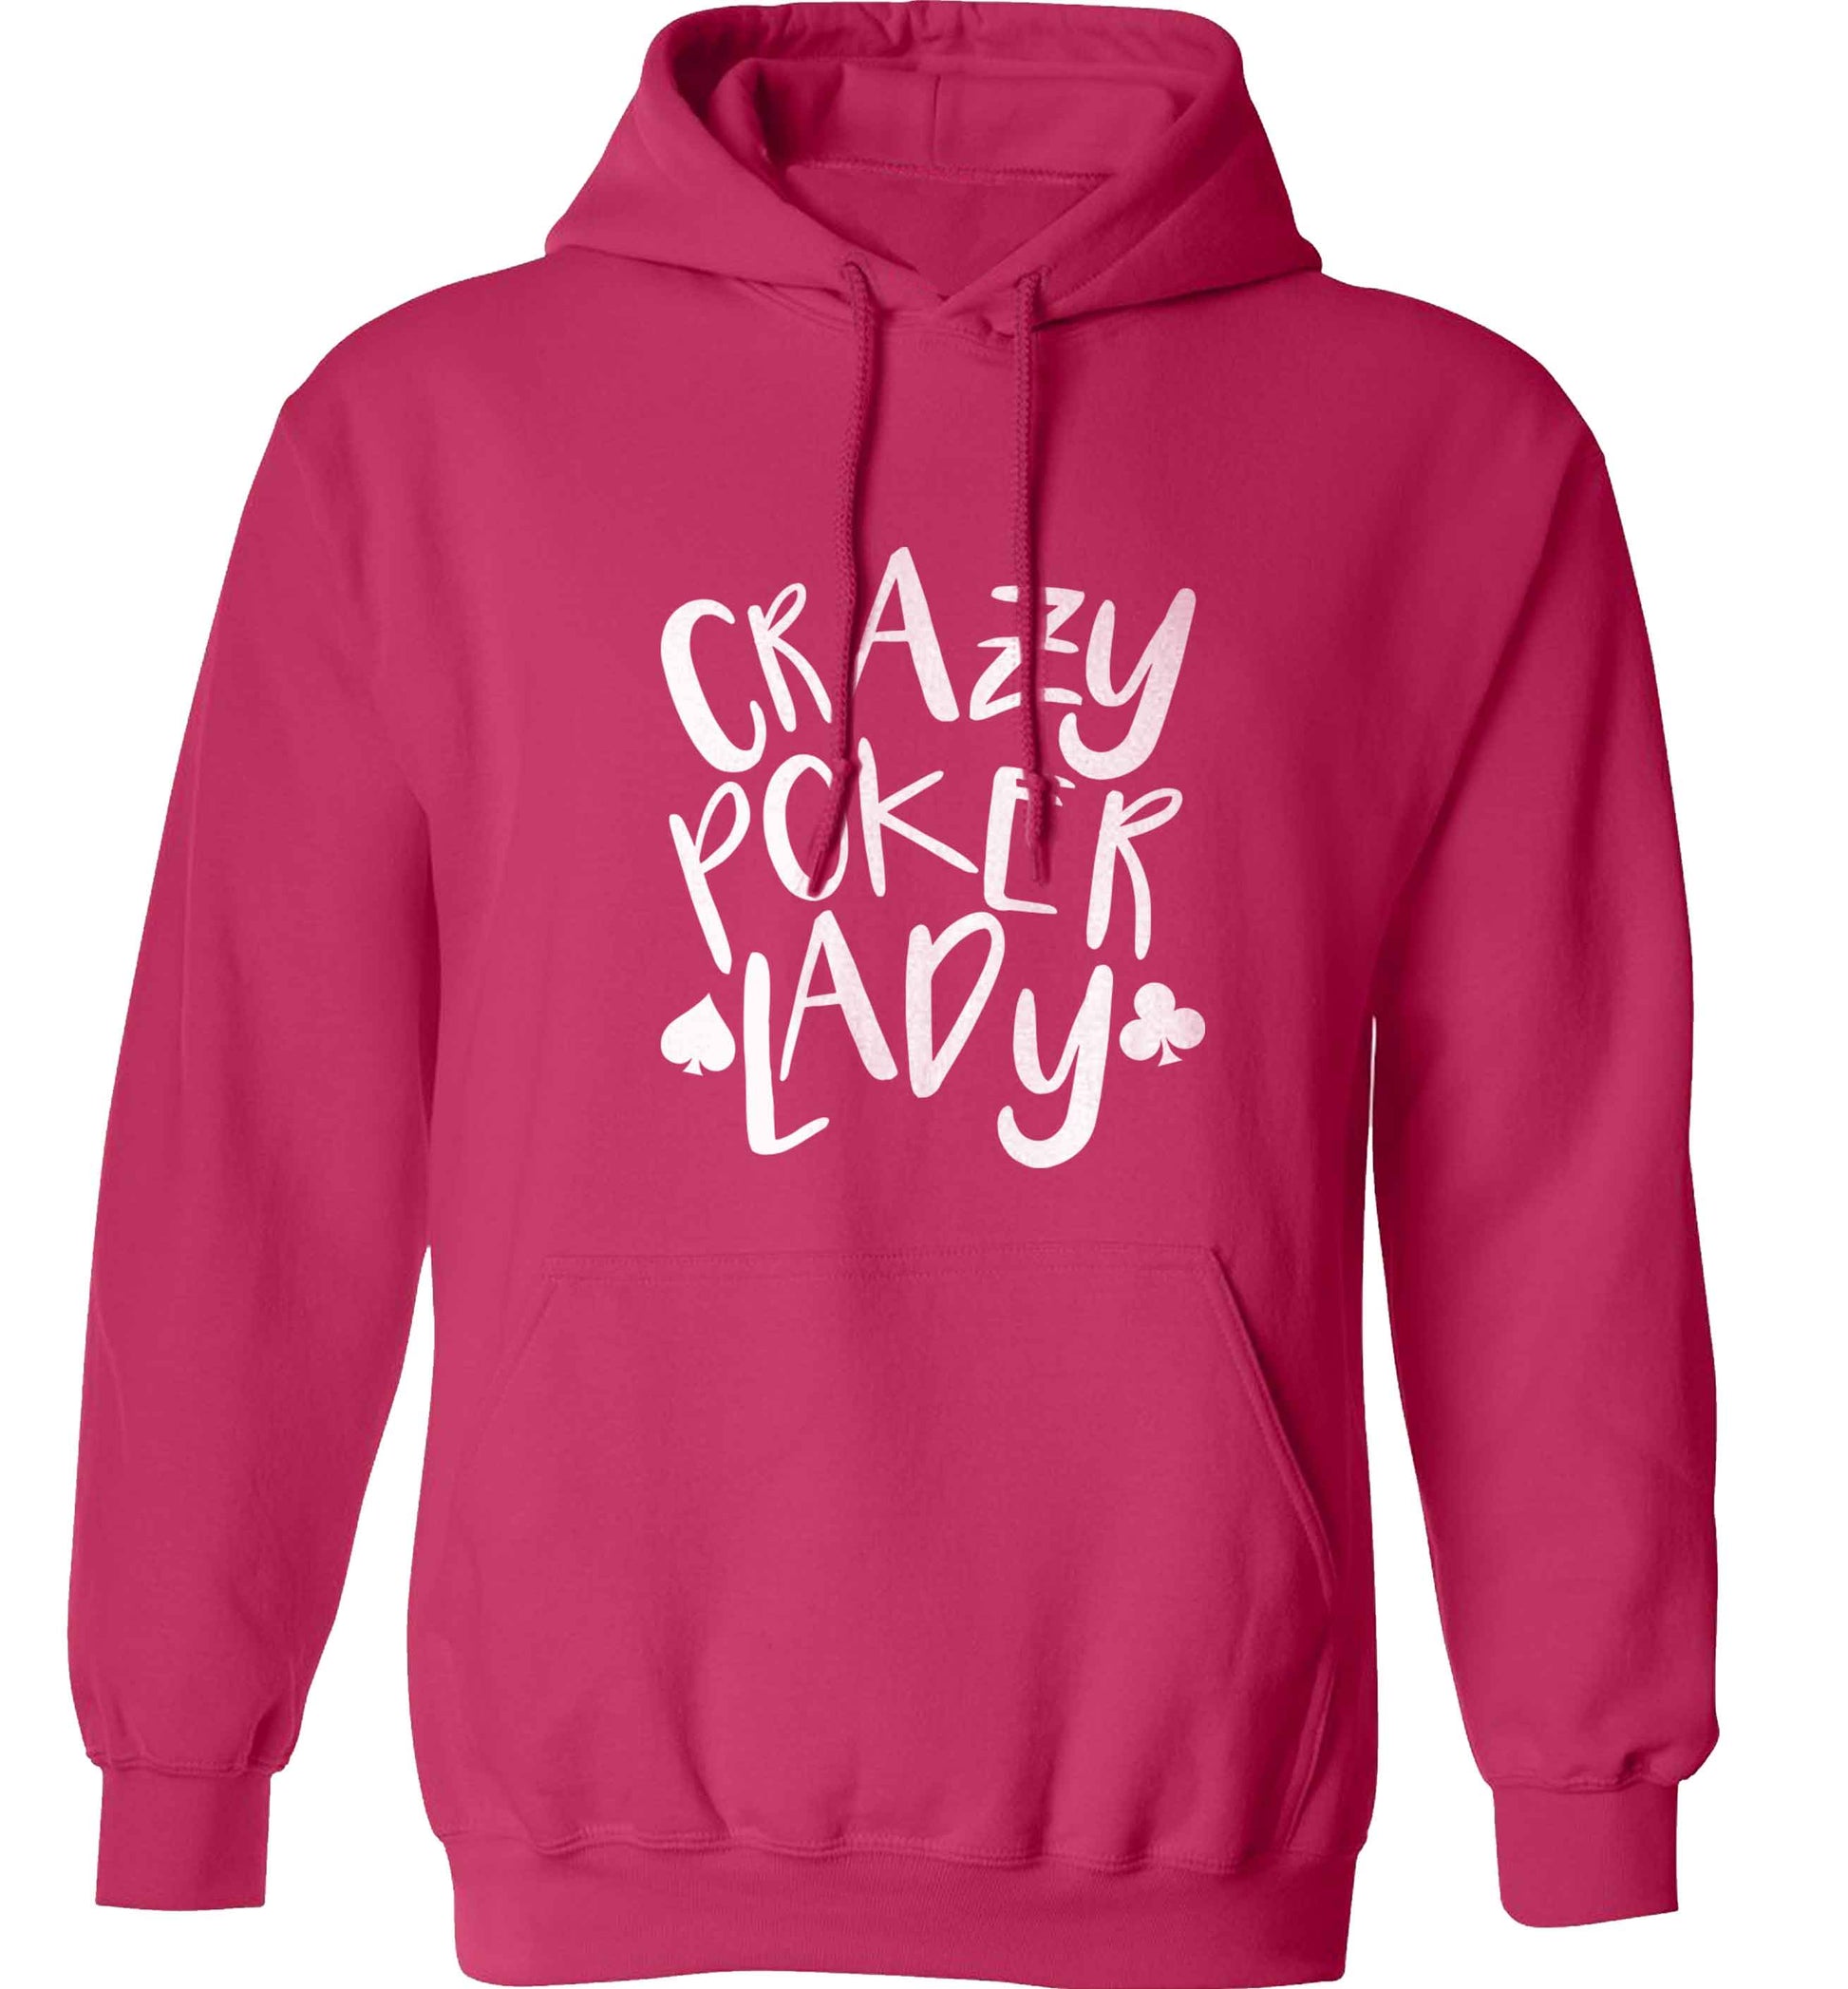 Crazy poker lady adults unisex pink hoodie 2XL